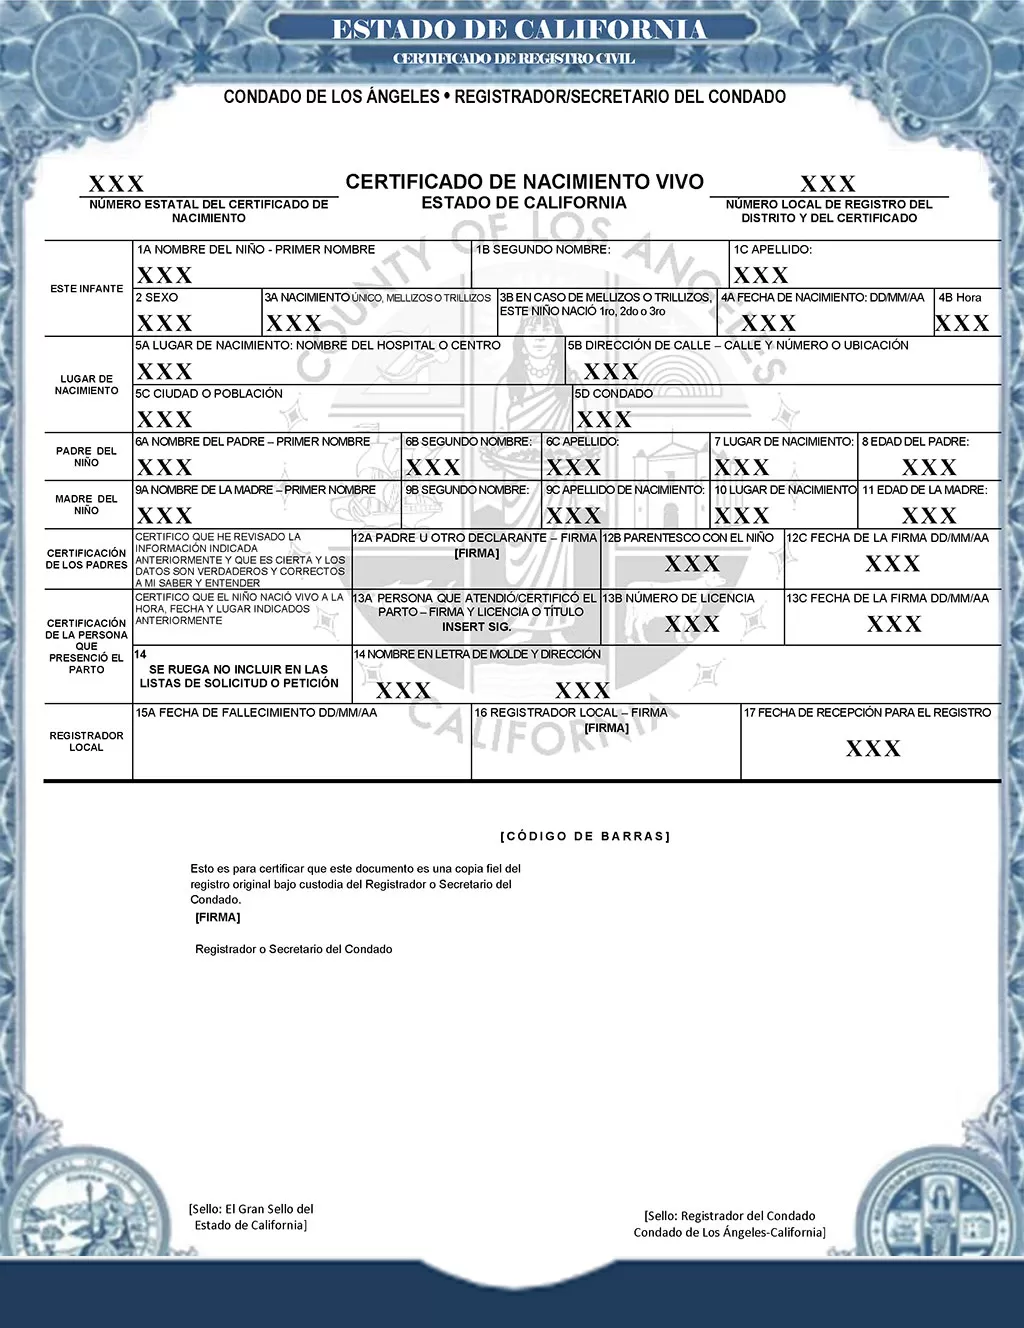 Fast, Easy, and Accurate Birth Certificate Translations Throughout Birth Certificate Translation Template English To Spanish